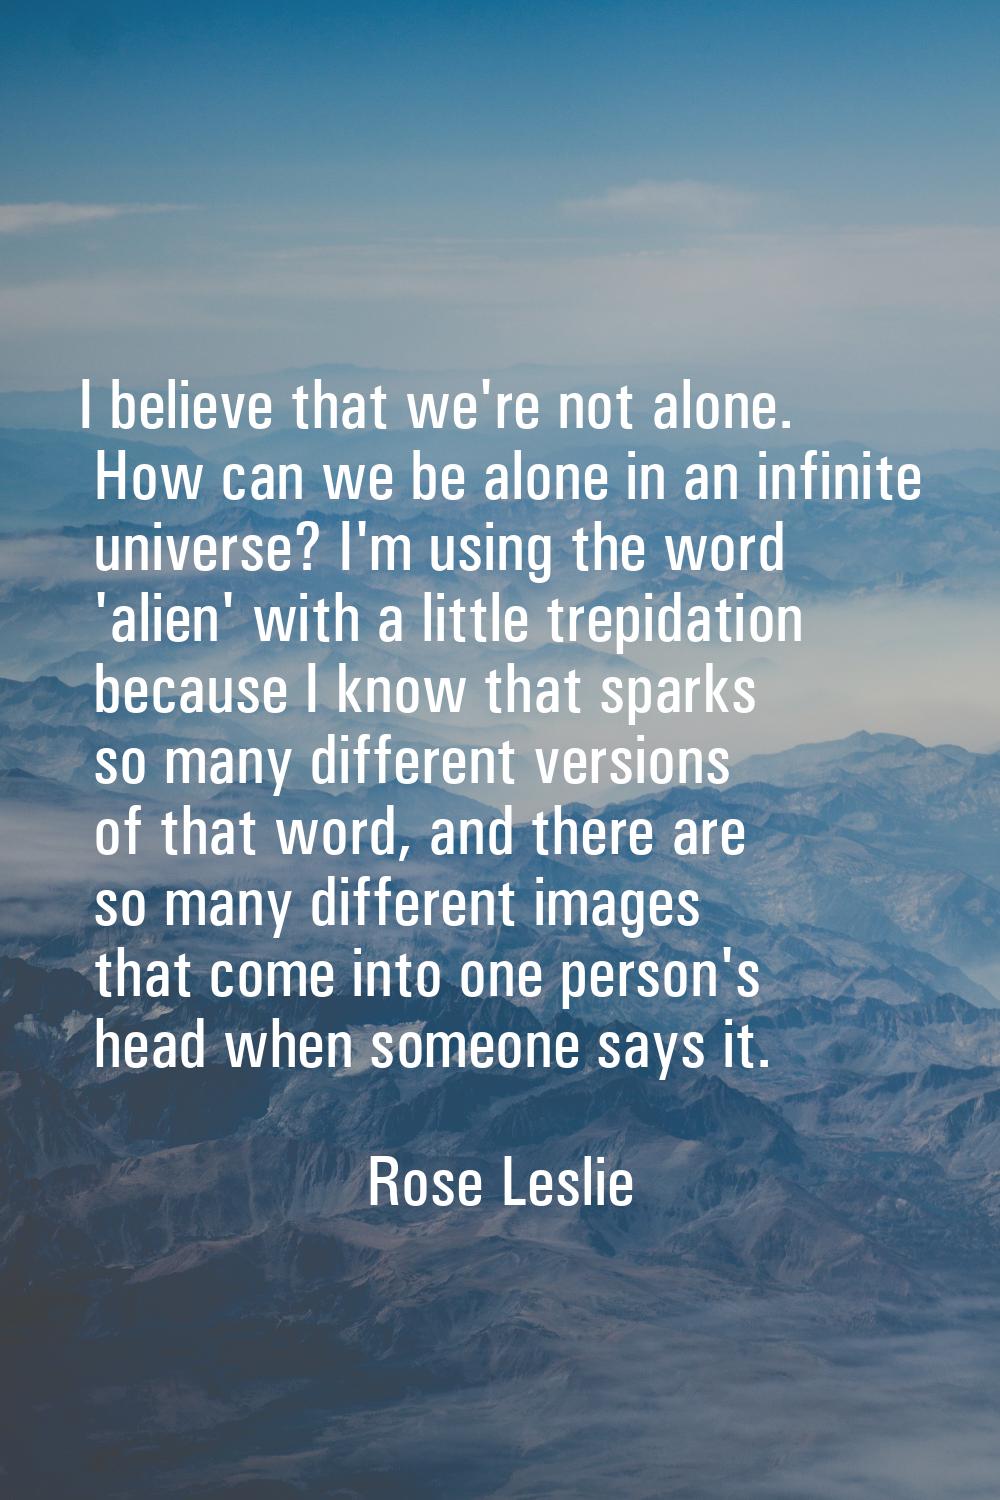 I believe that we're not alone. How can we be alone in an infinite universe? I'm using the word 'al